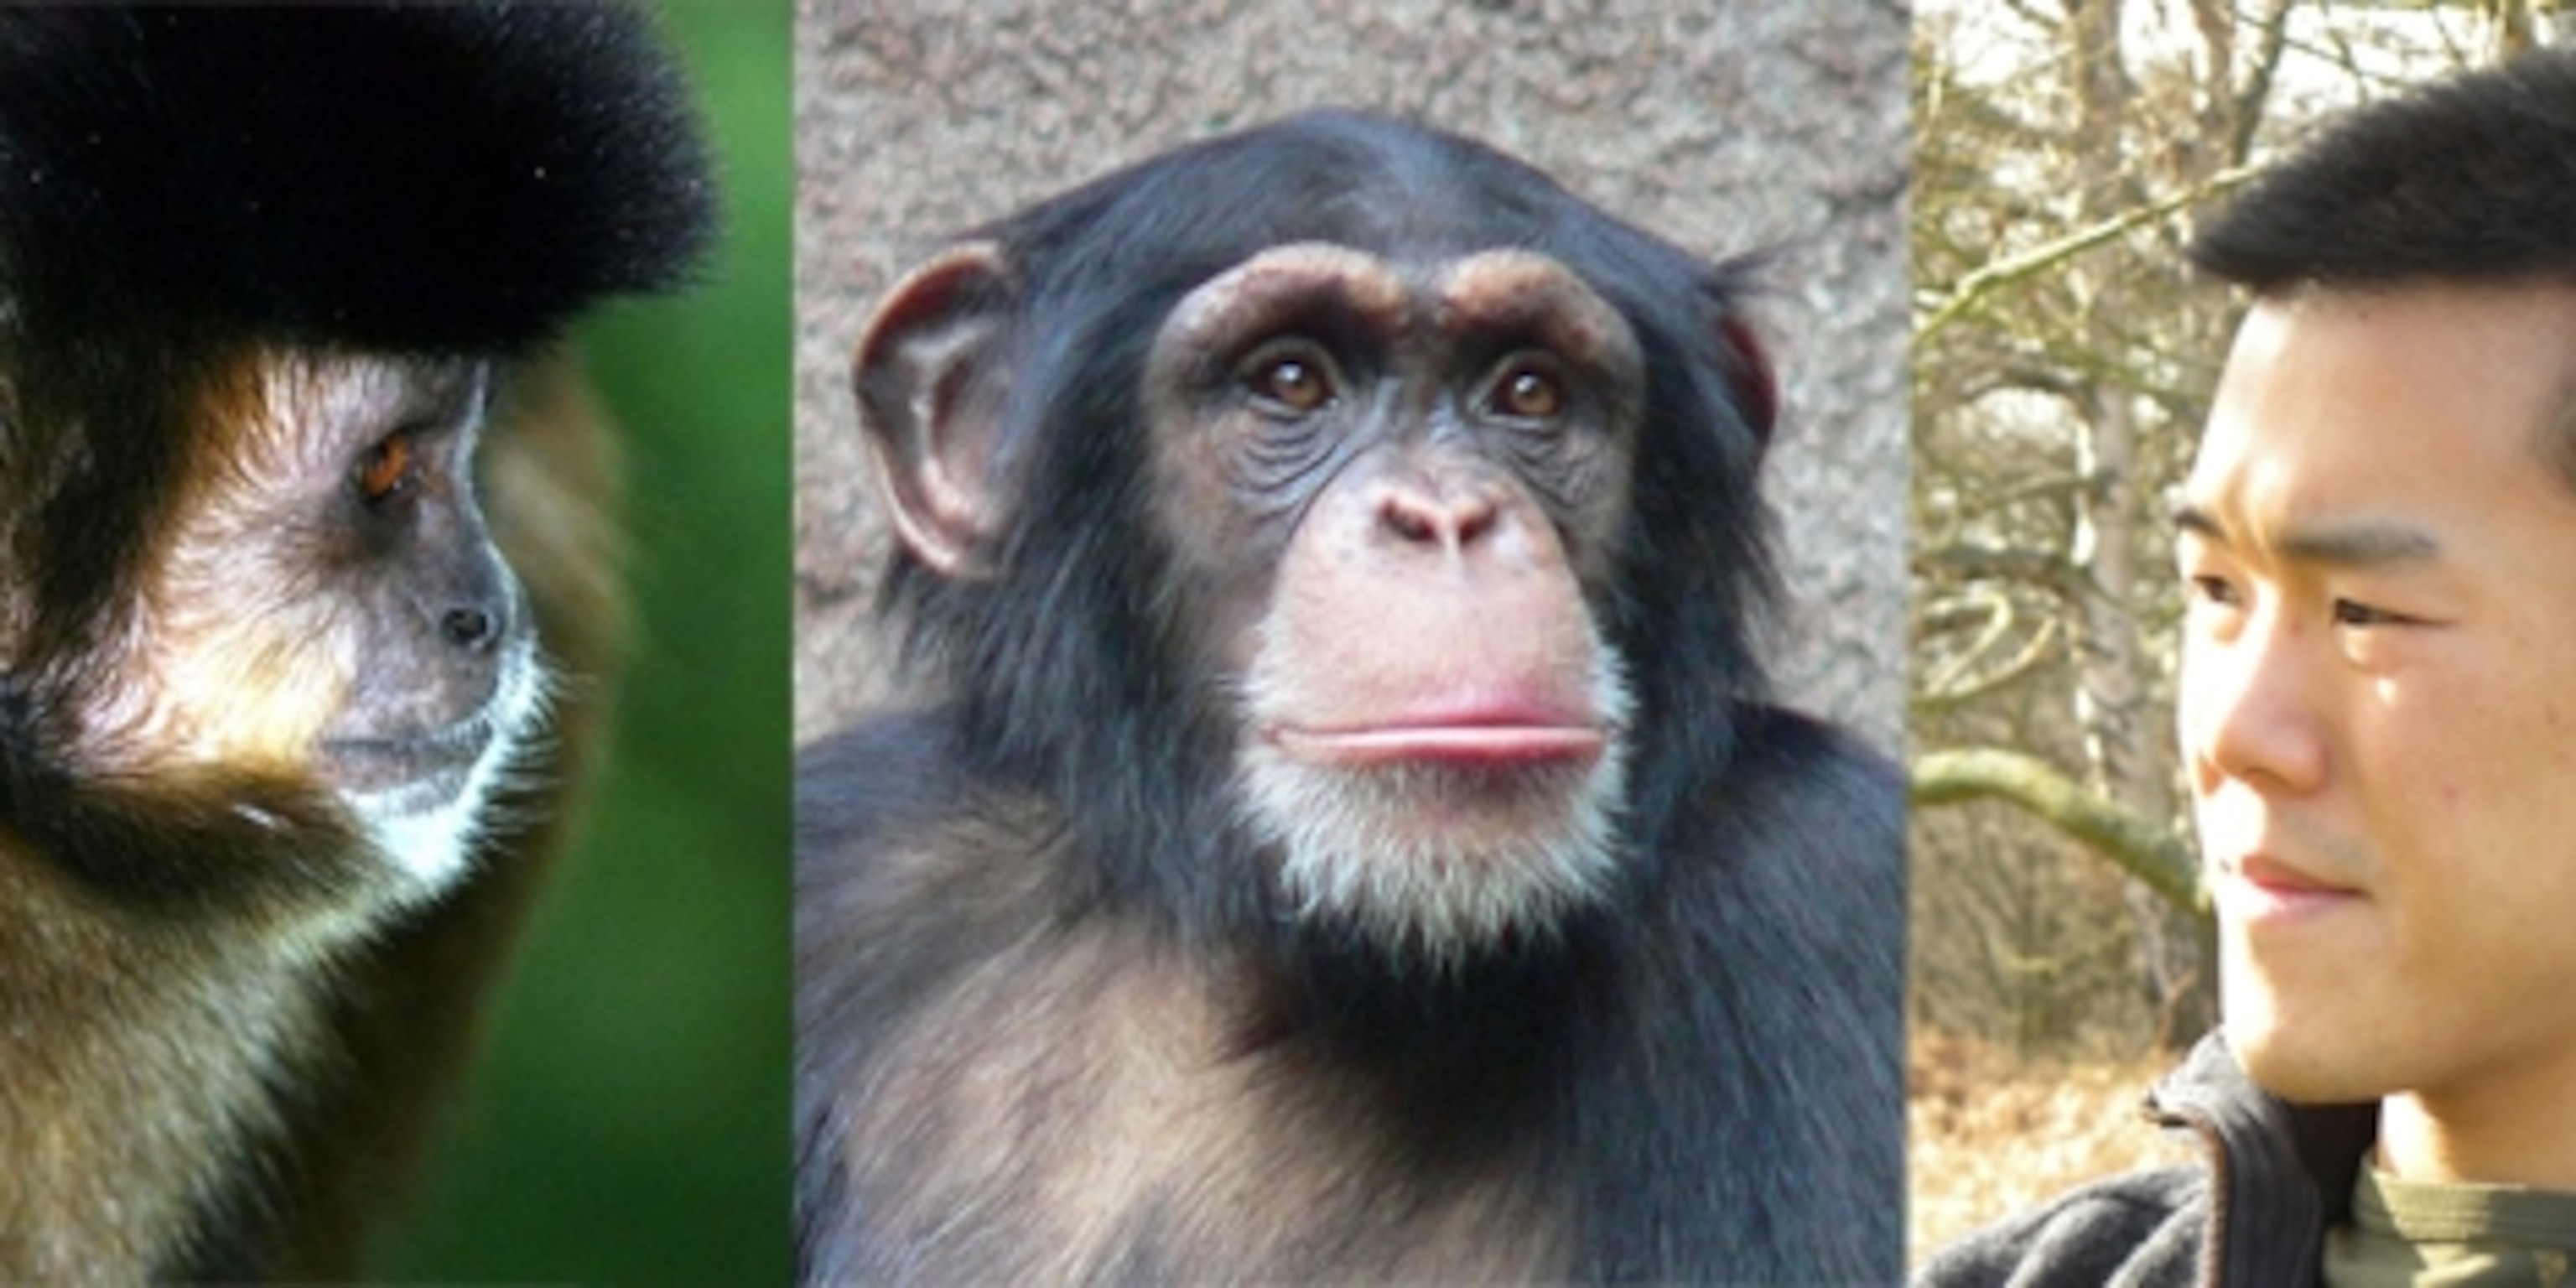 What makes monkeys different from humans?